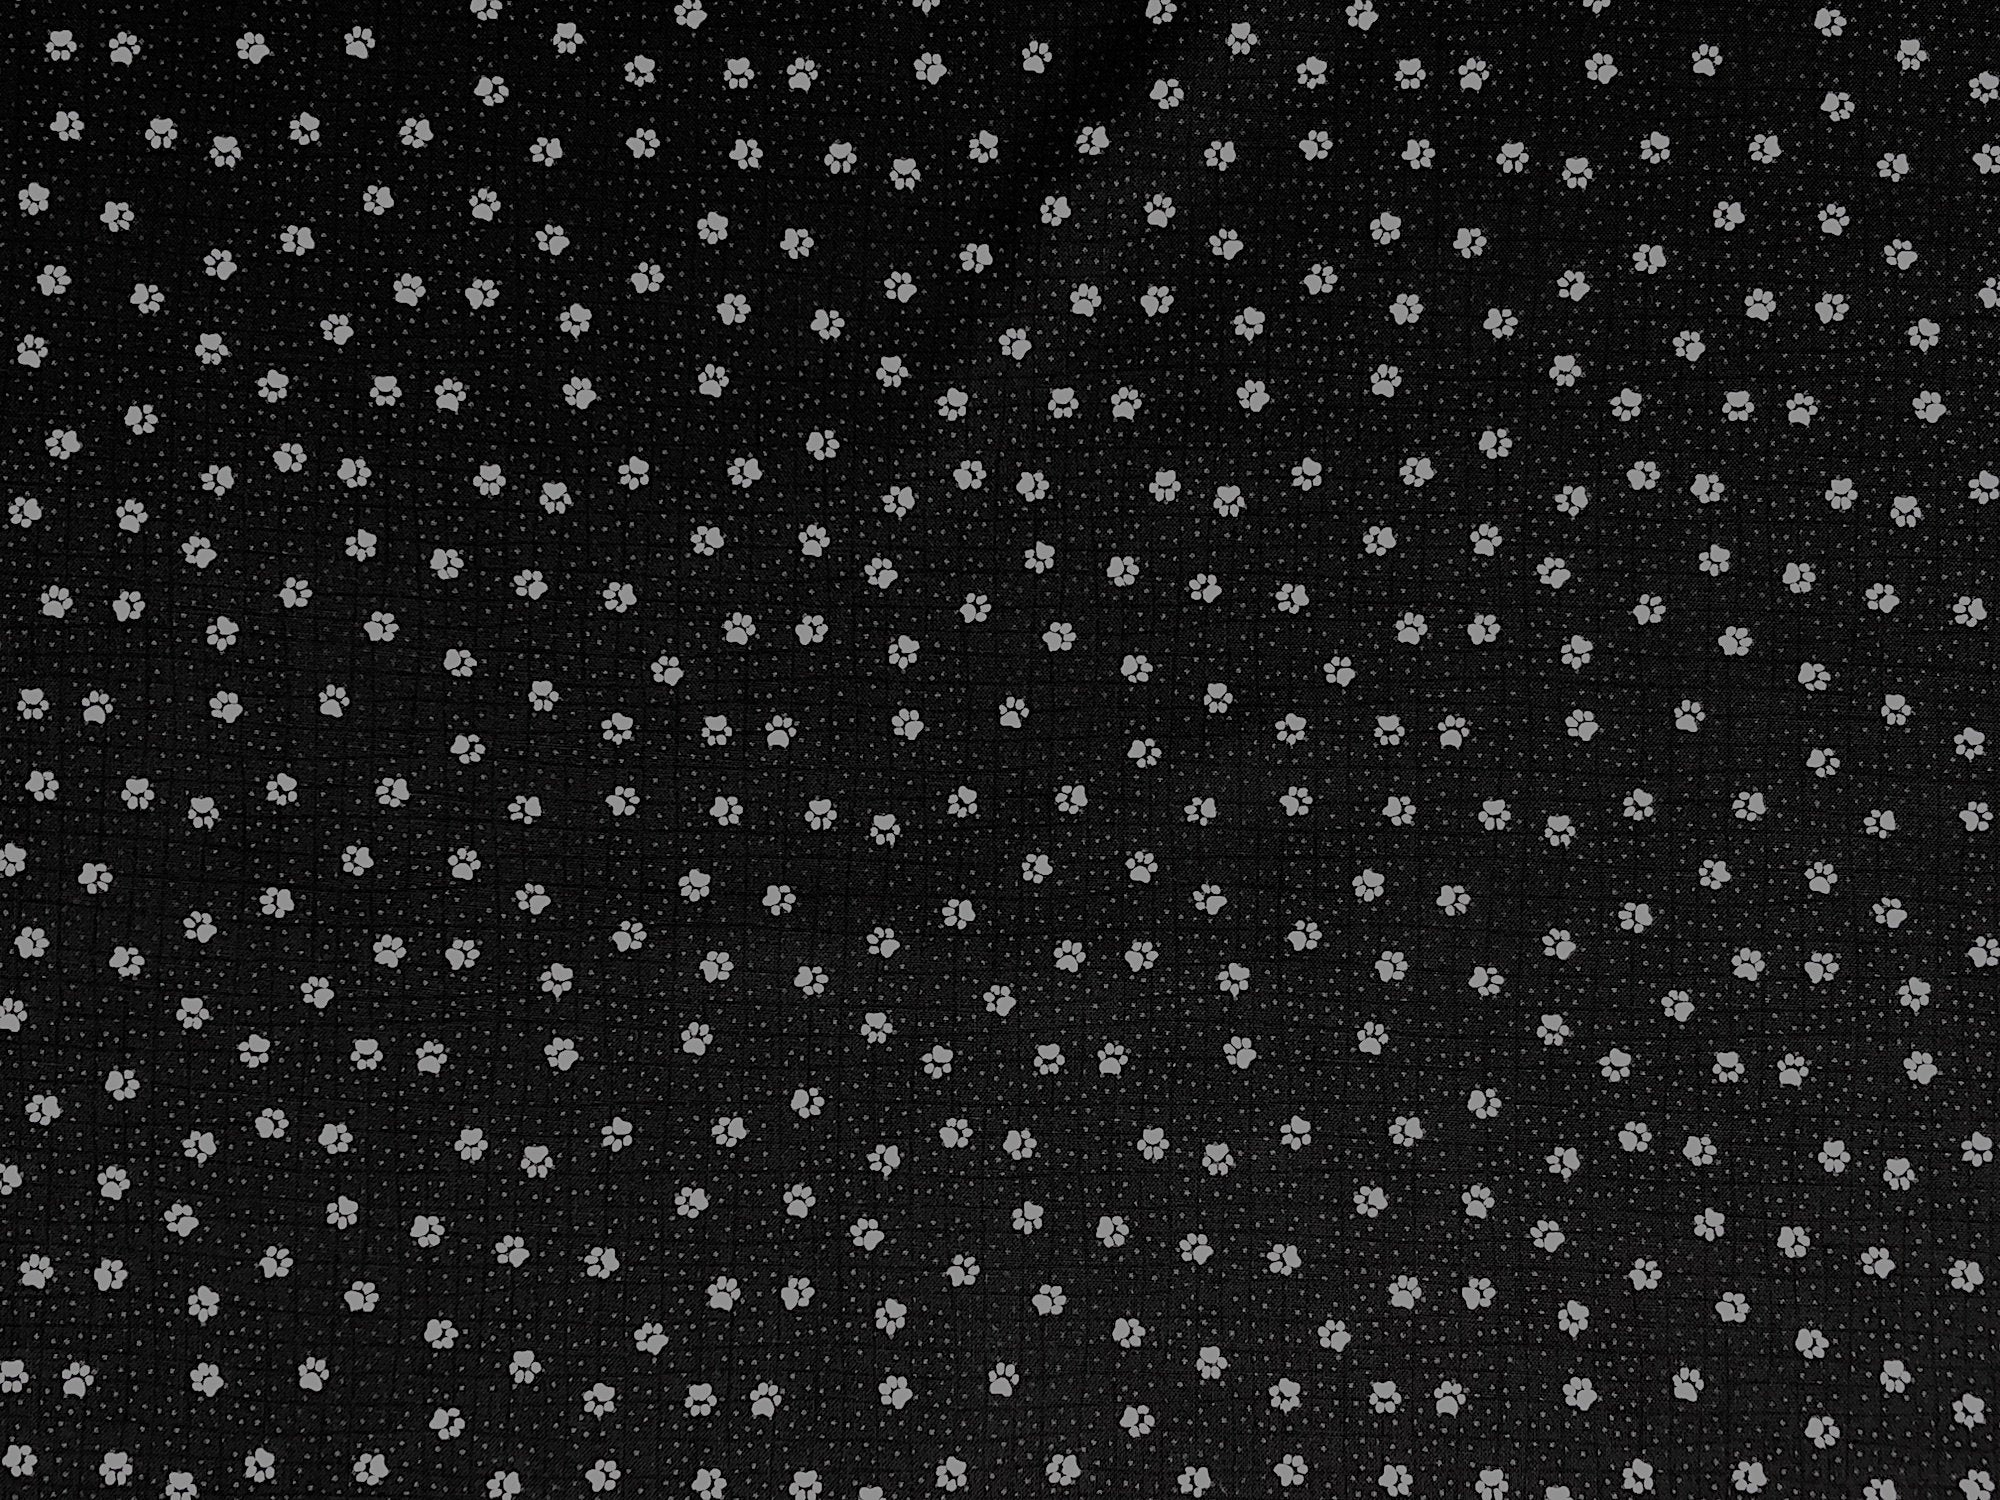 This black cotton fabric is covered with white paw prints